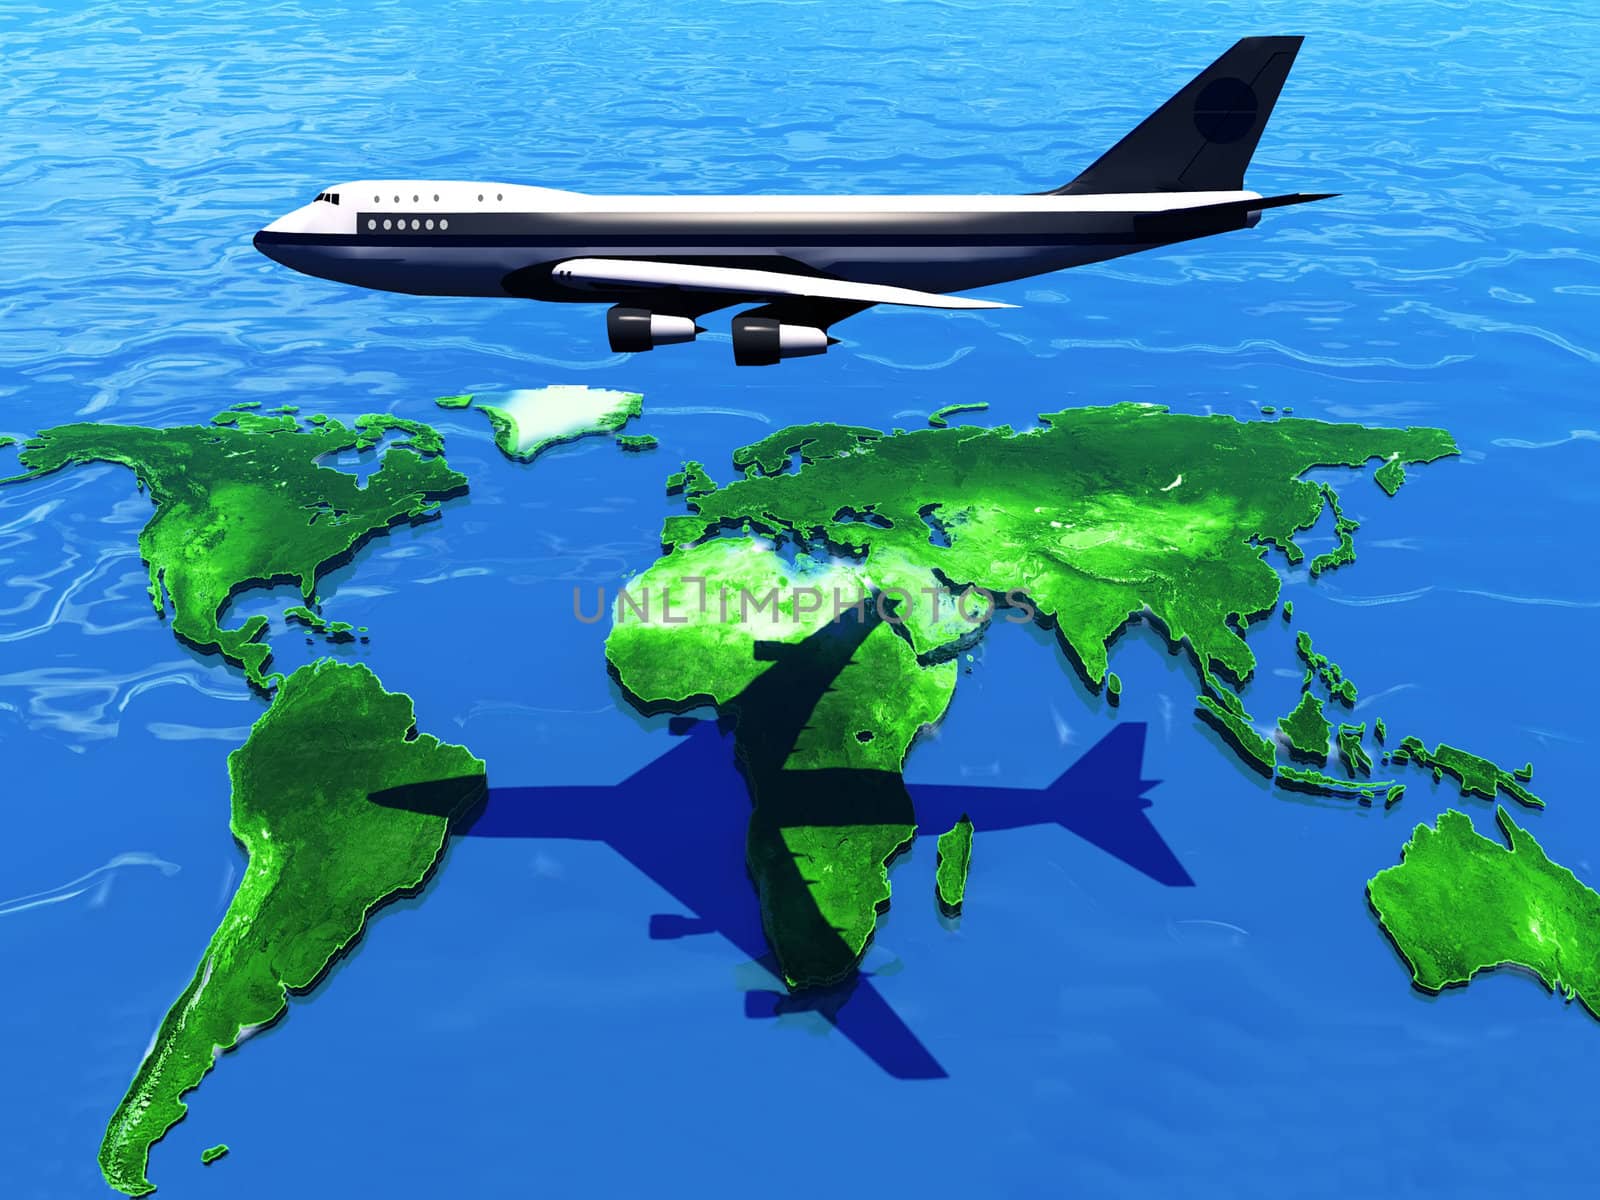 earth map and airplane by njaj